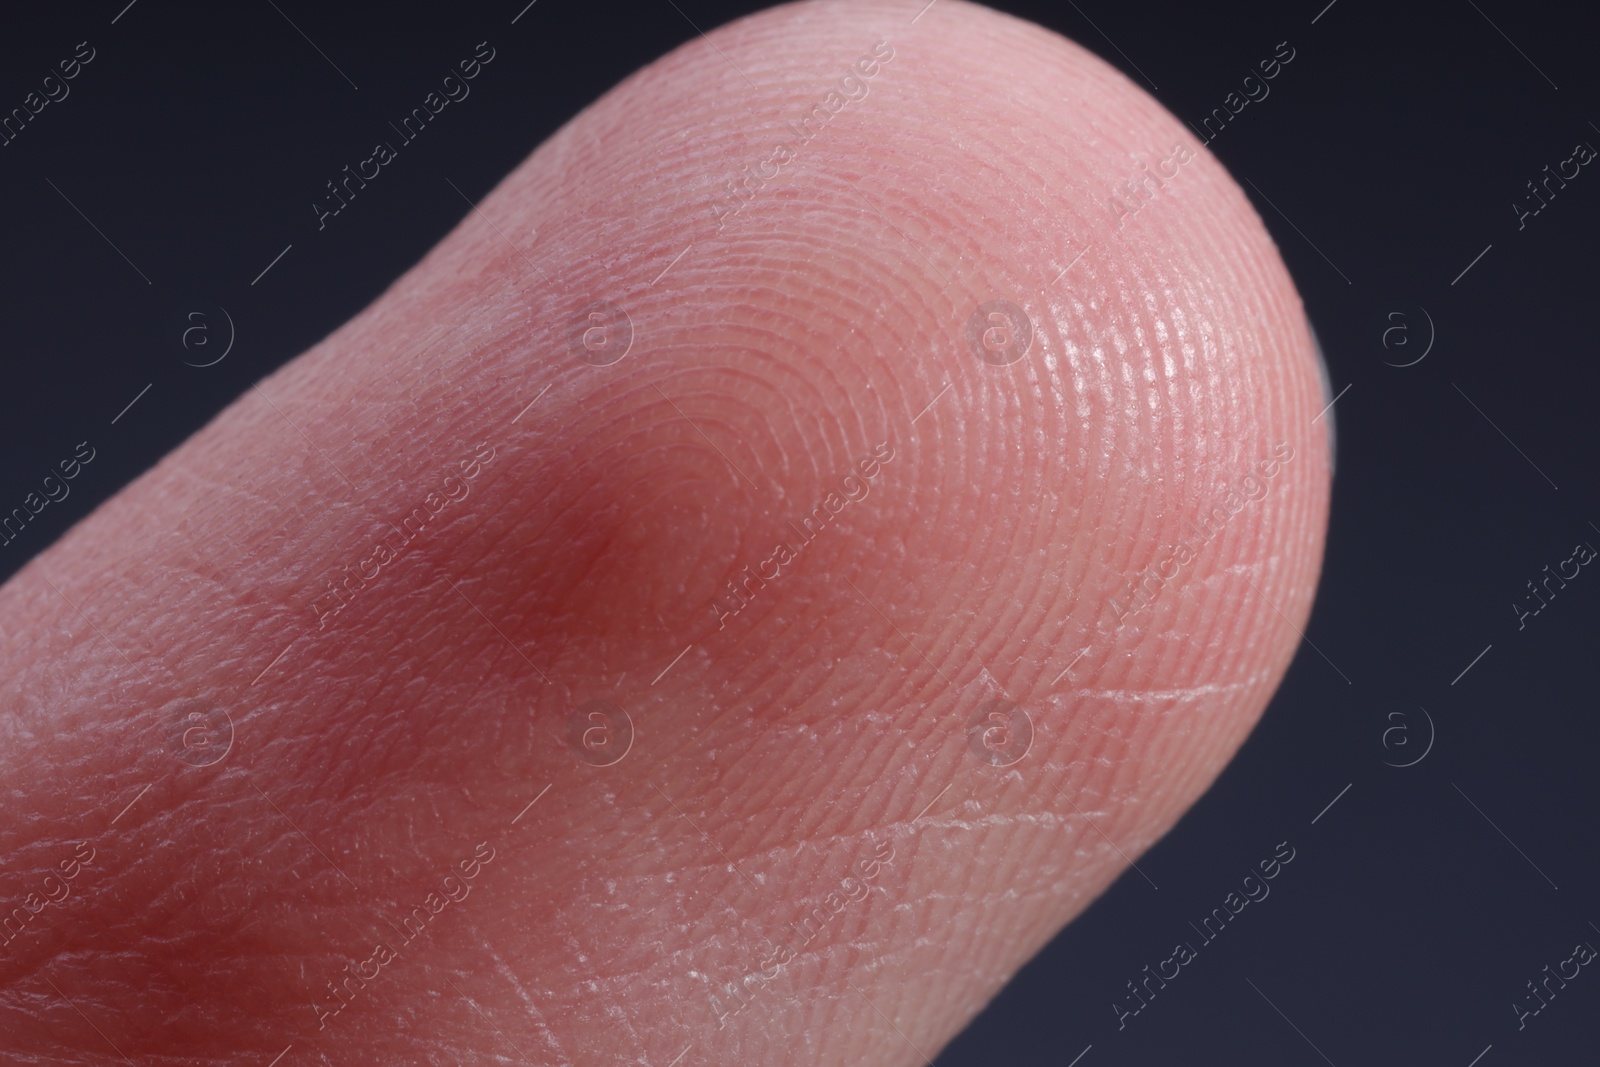 Photo of Finger with friction ridges on dark background, macro view